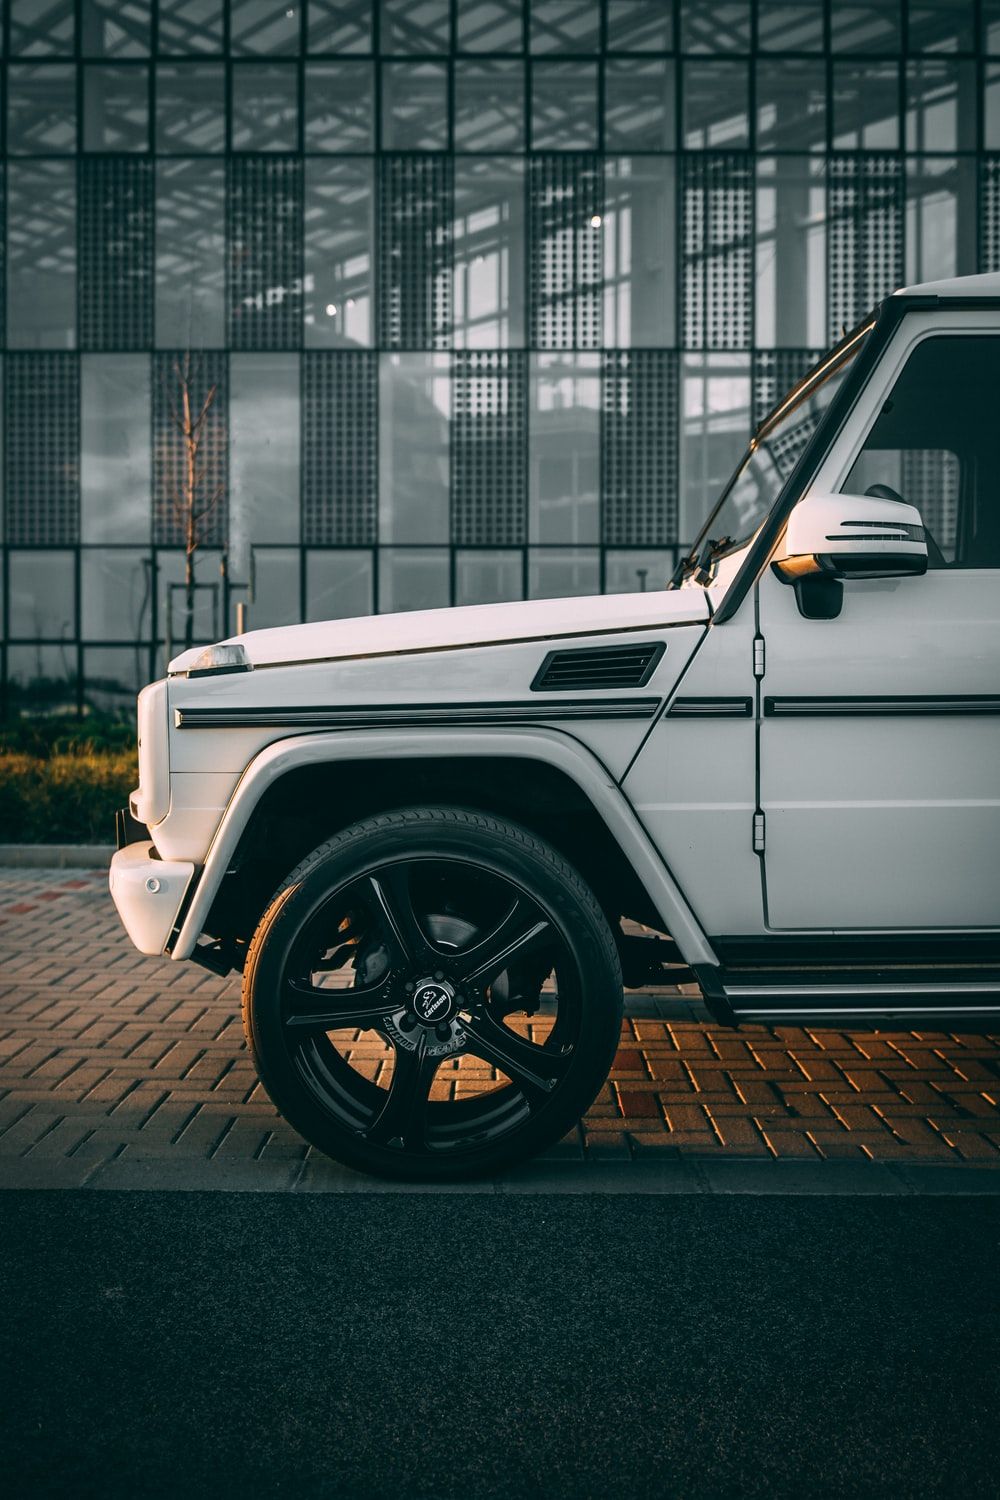 G Wagon Picture. Download Free Image